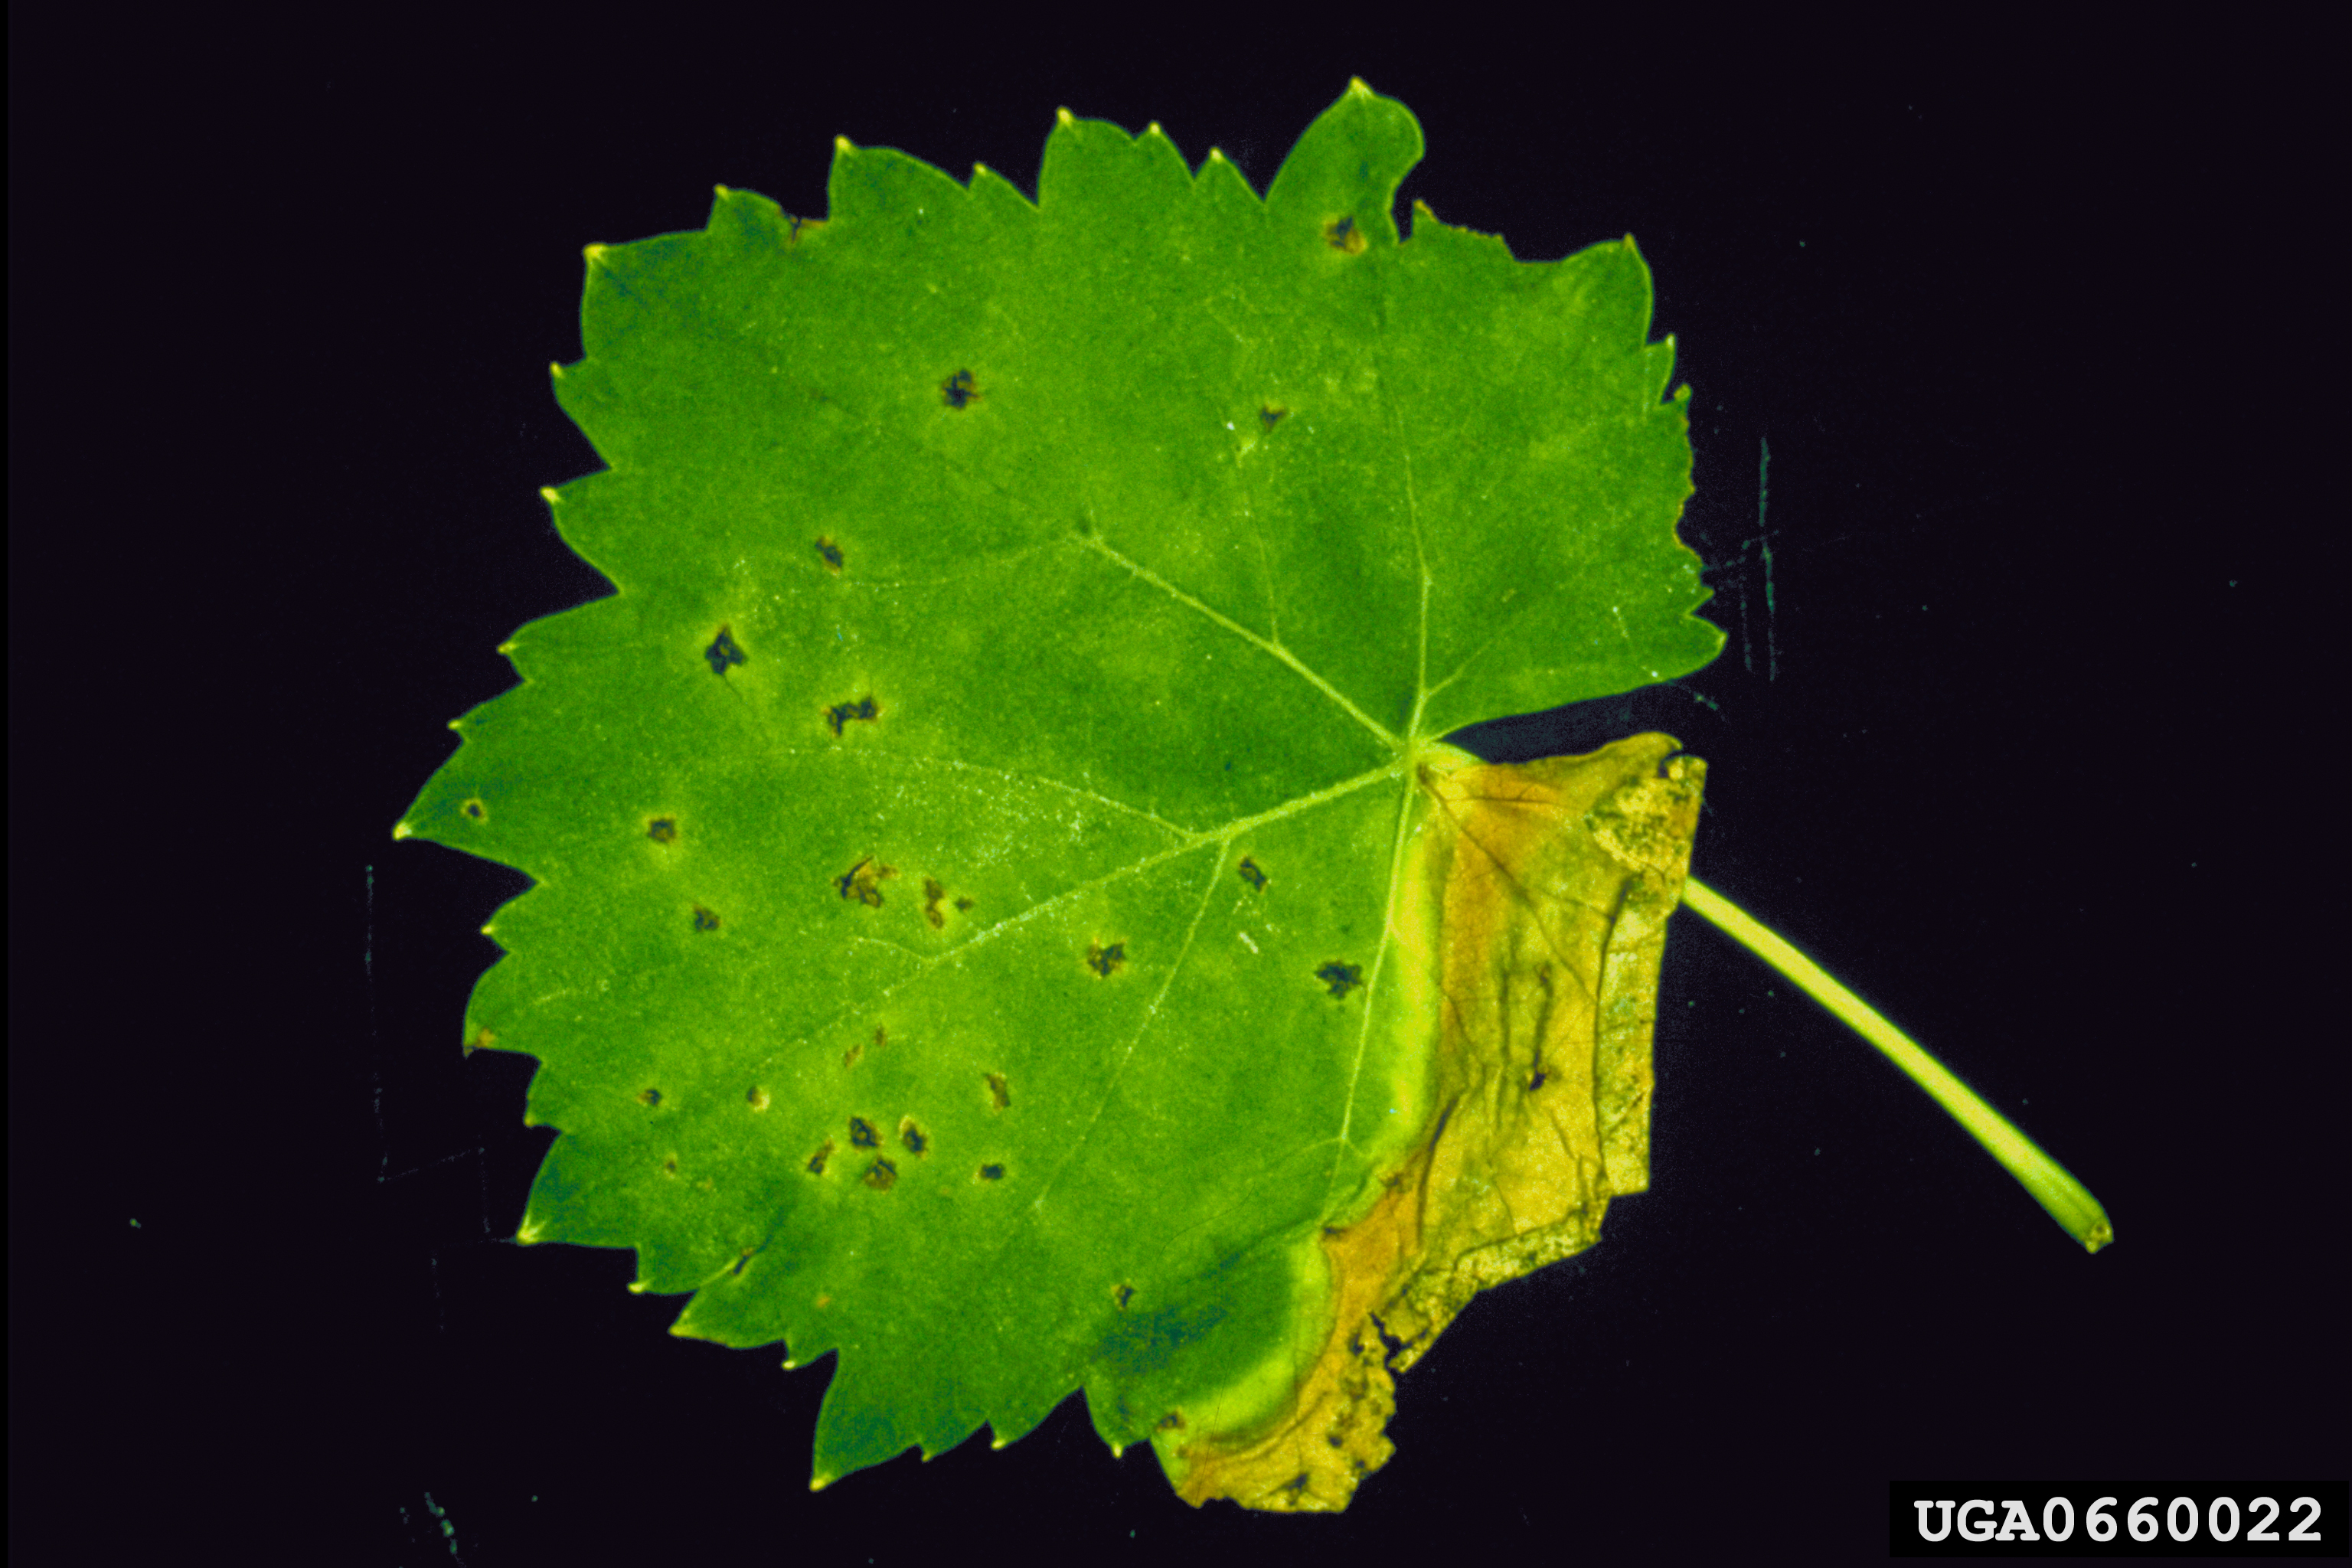 Green grapevine leaf with dark lesions and a section that has yellowed and is dying